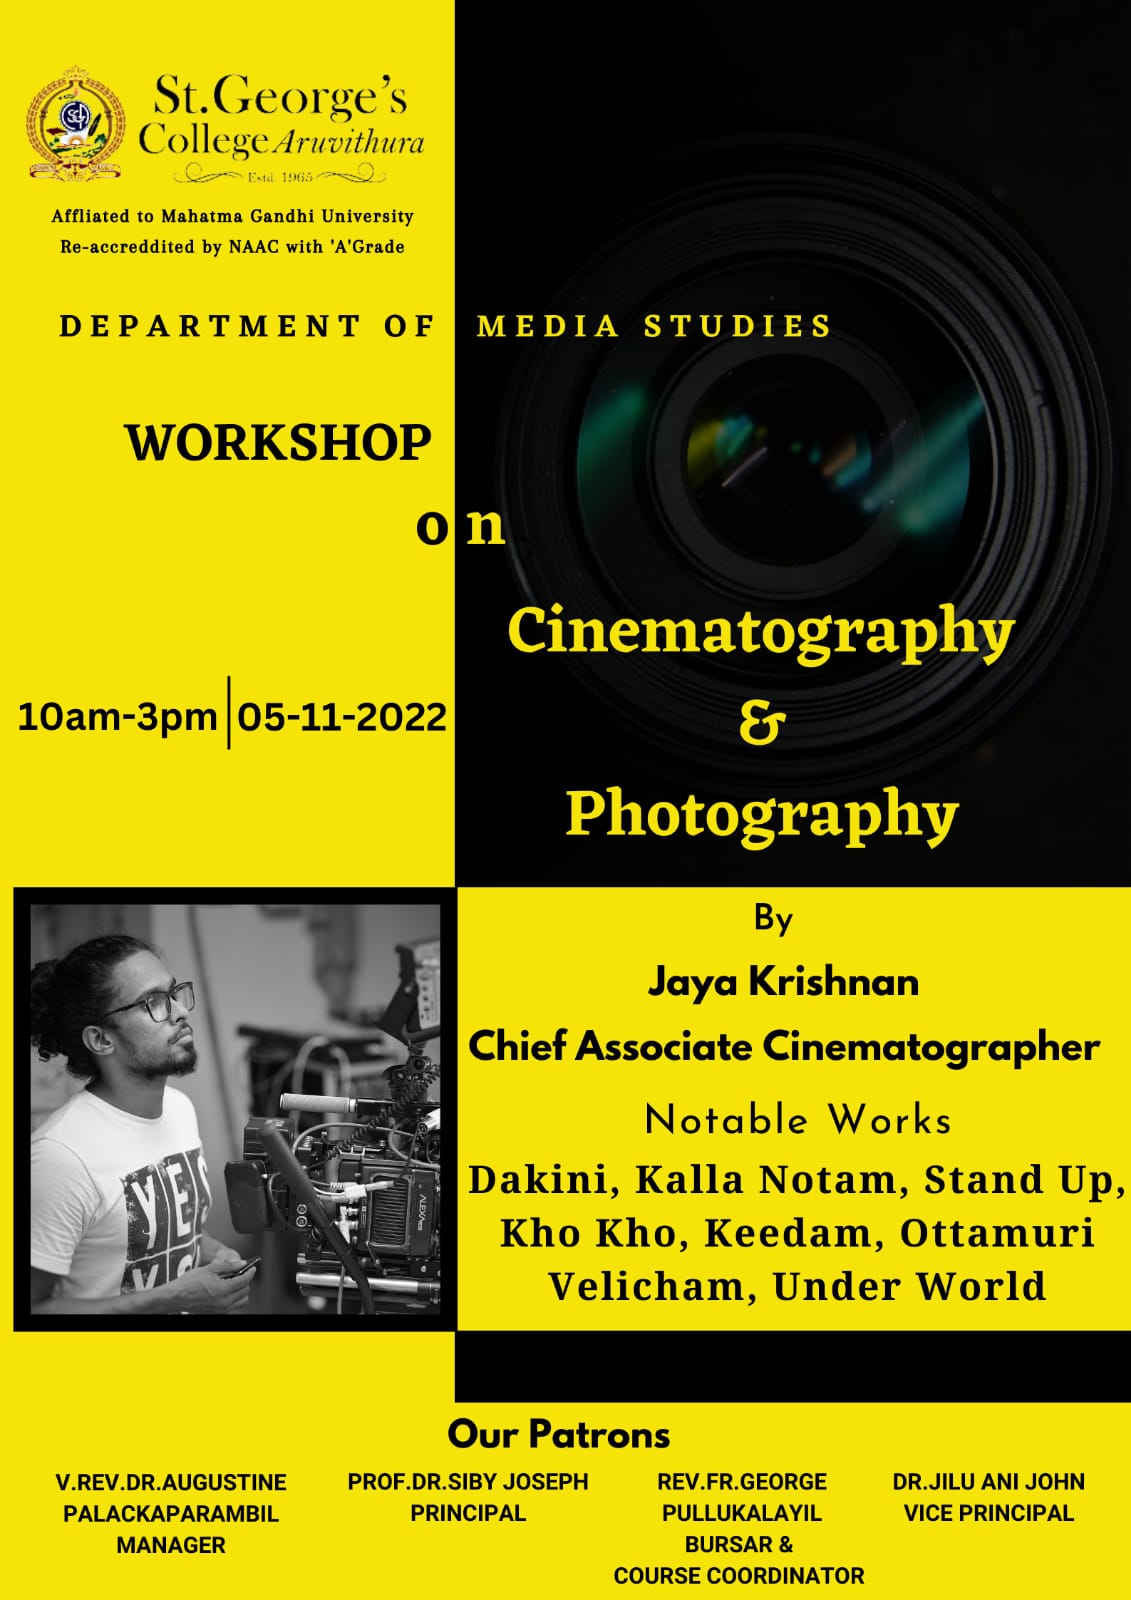 Workshop on Cinematography & Photography - Department of Media Studies